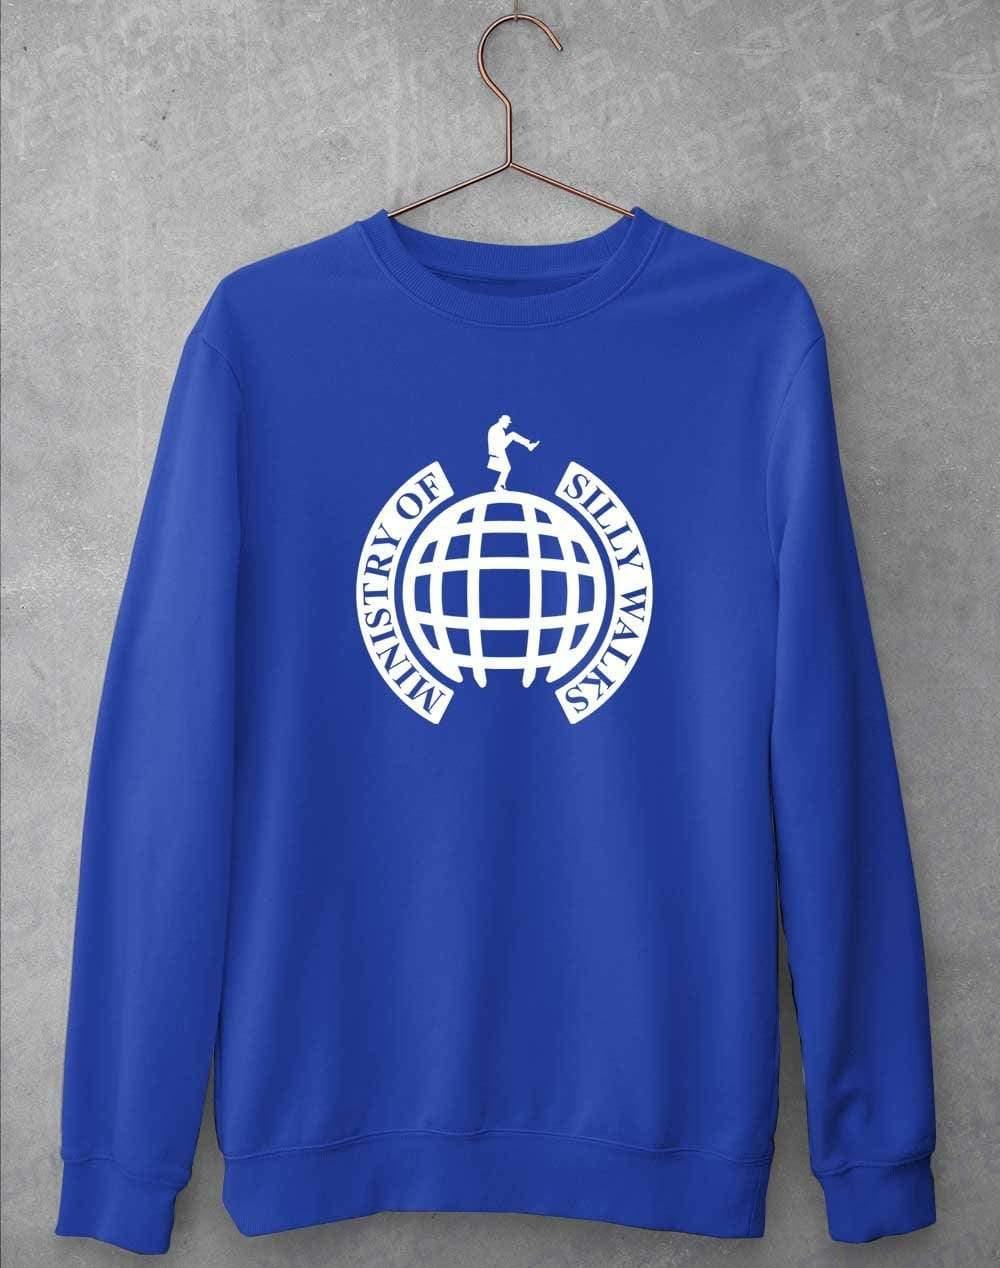 Ministry of Silly Walks Sweatshirt S / Royal Blue  - Off World Tees